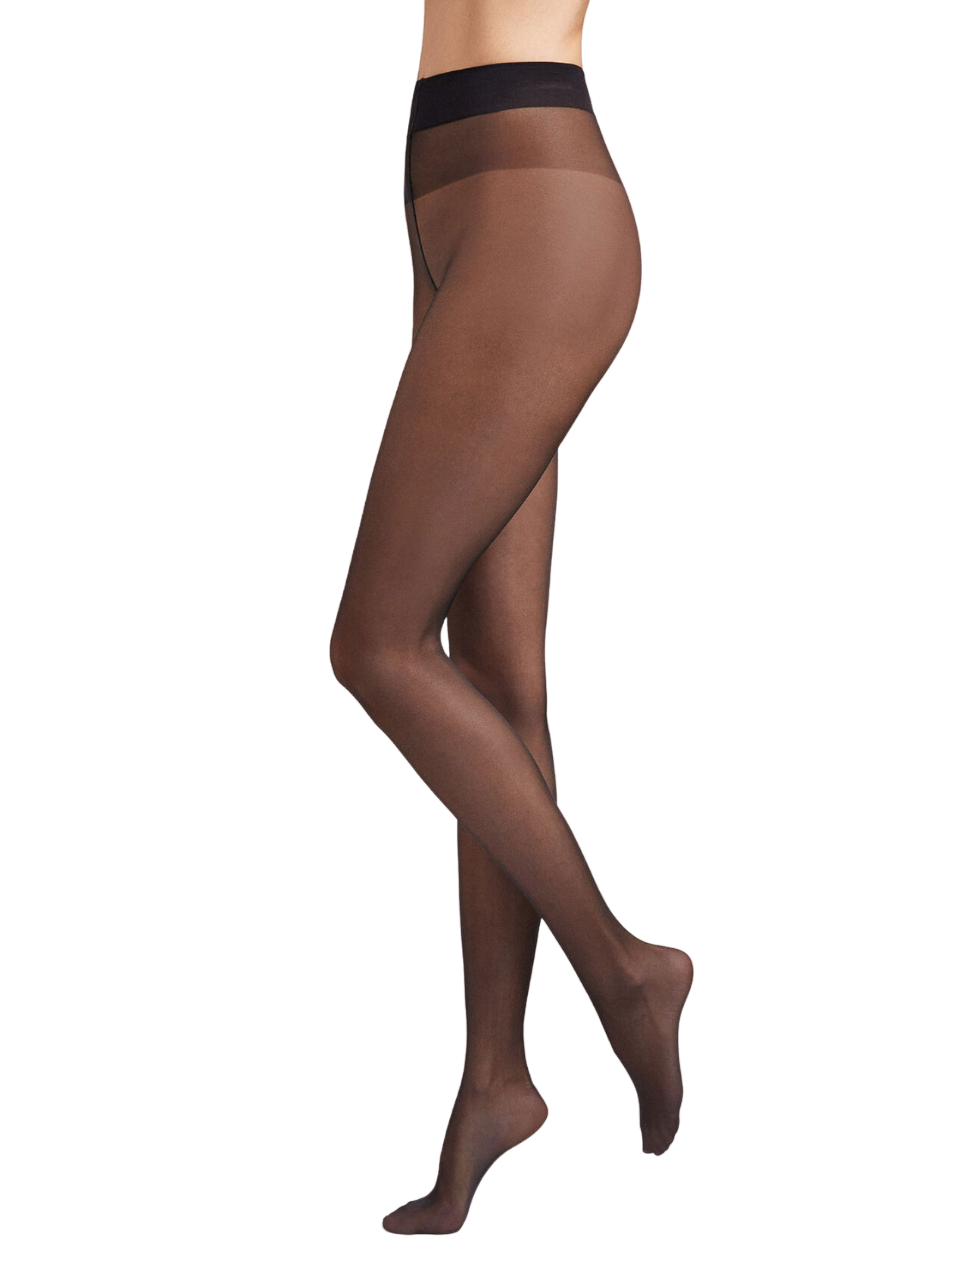 Wolford Tummy 20 Control Top Black Tights For Women 